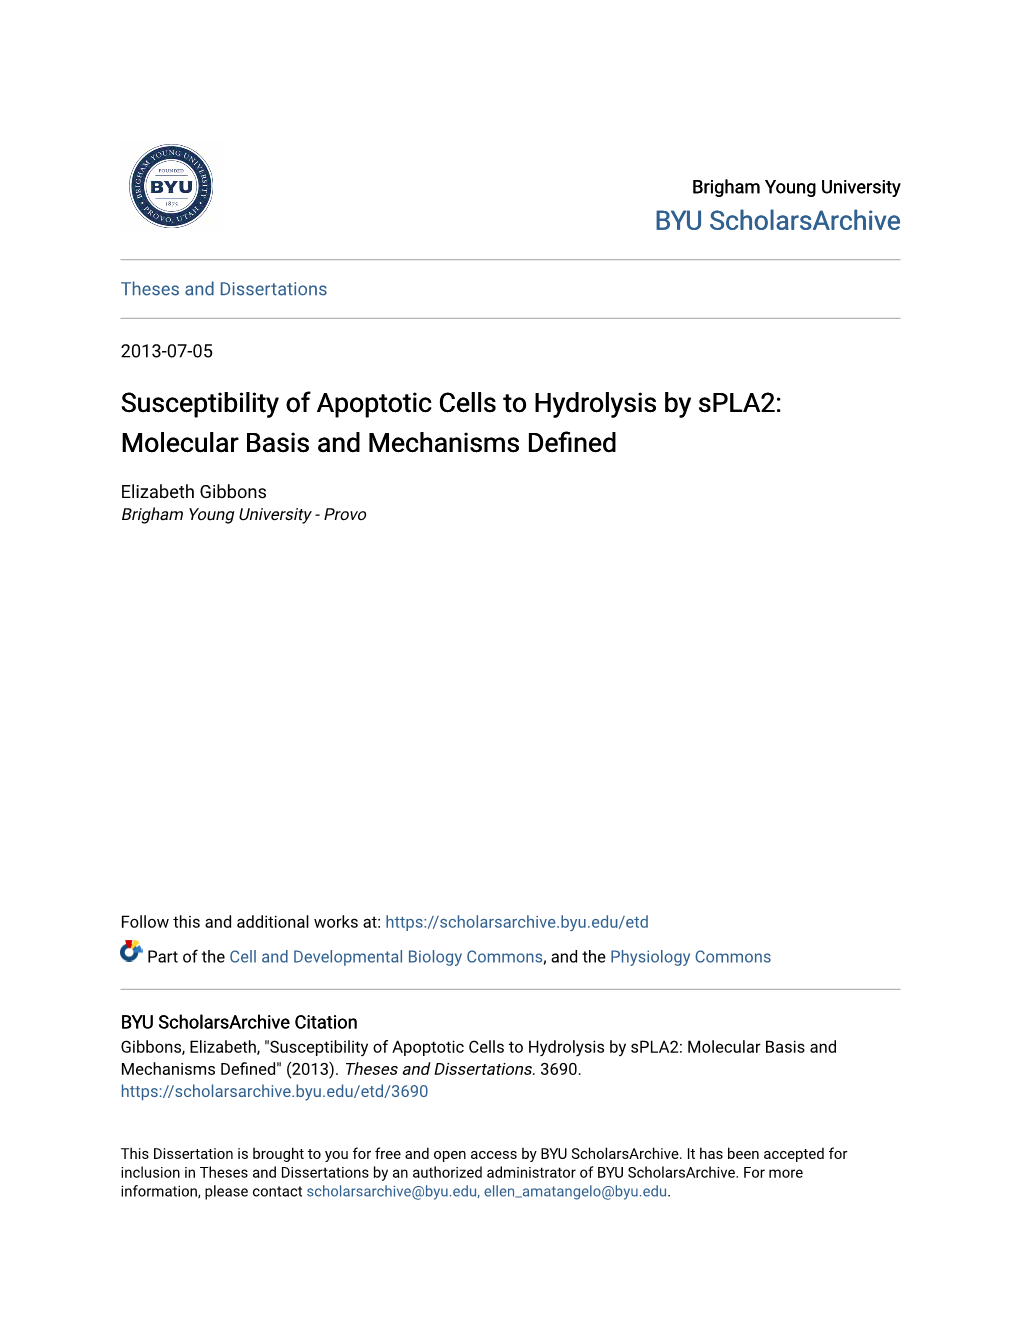 Susceptibility of Apoptotic Cells to Hydrolysis by Spla2: Molecular Basis and Mechanisms Defined